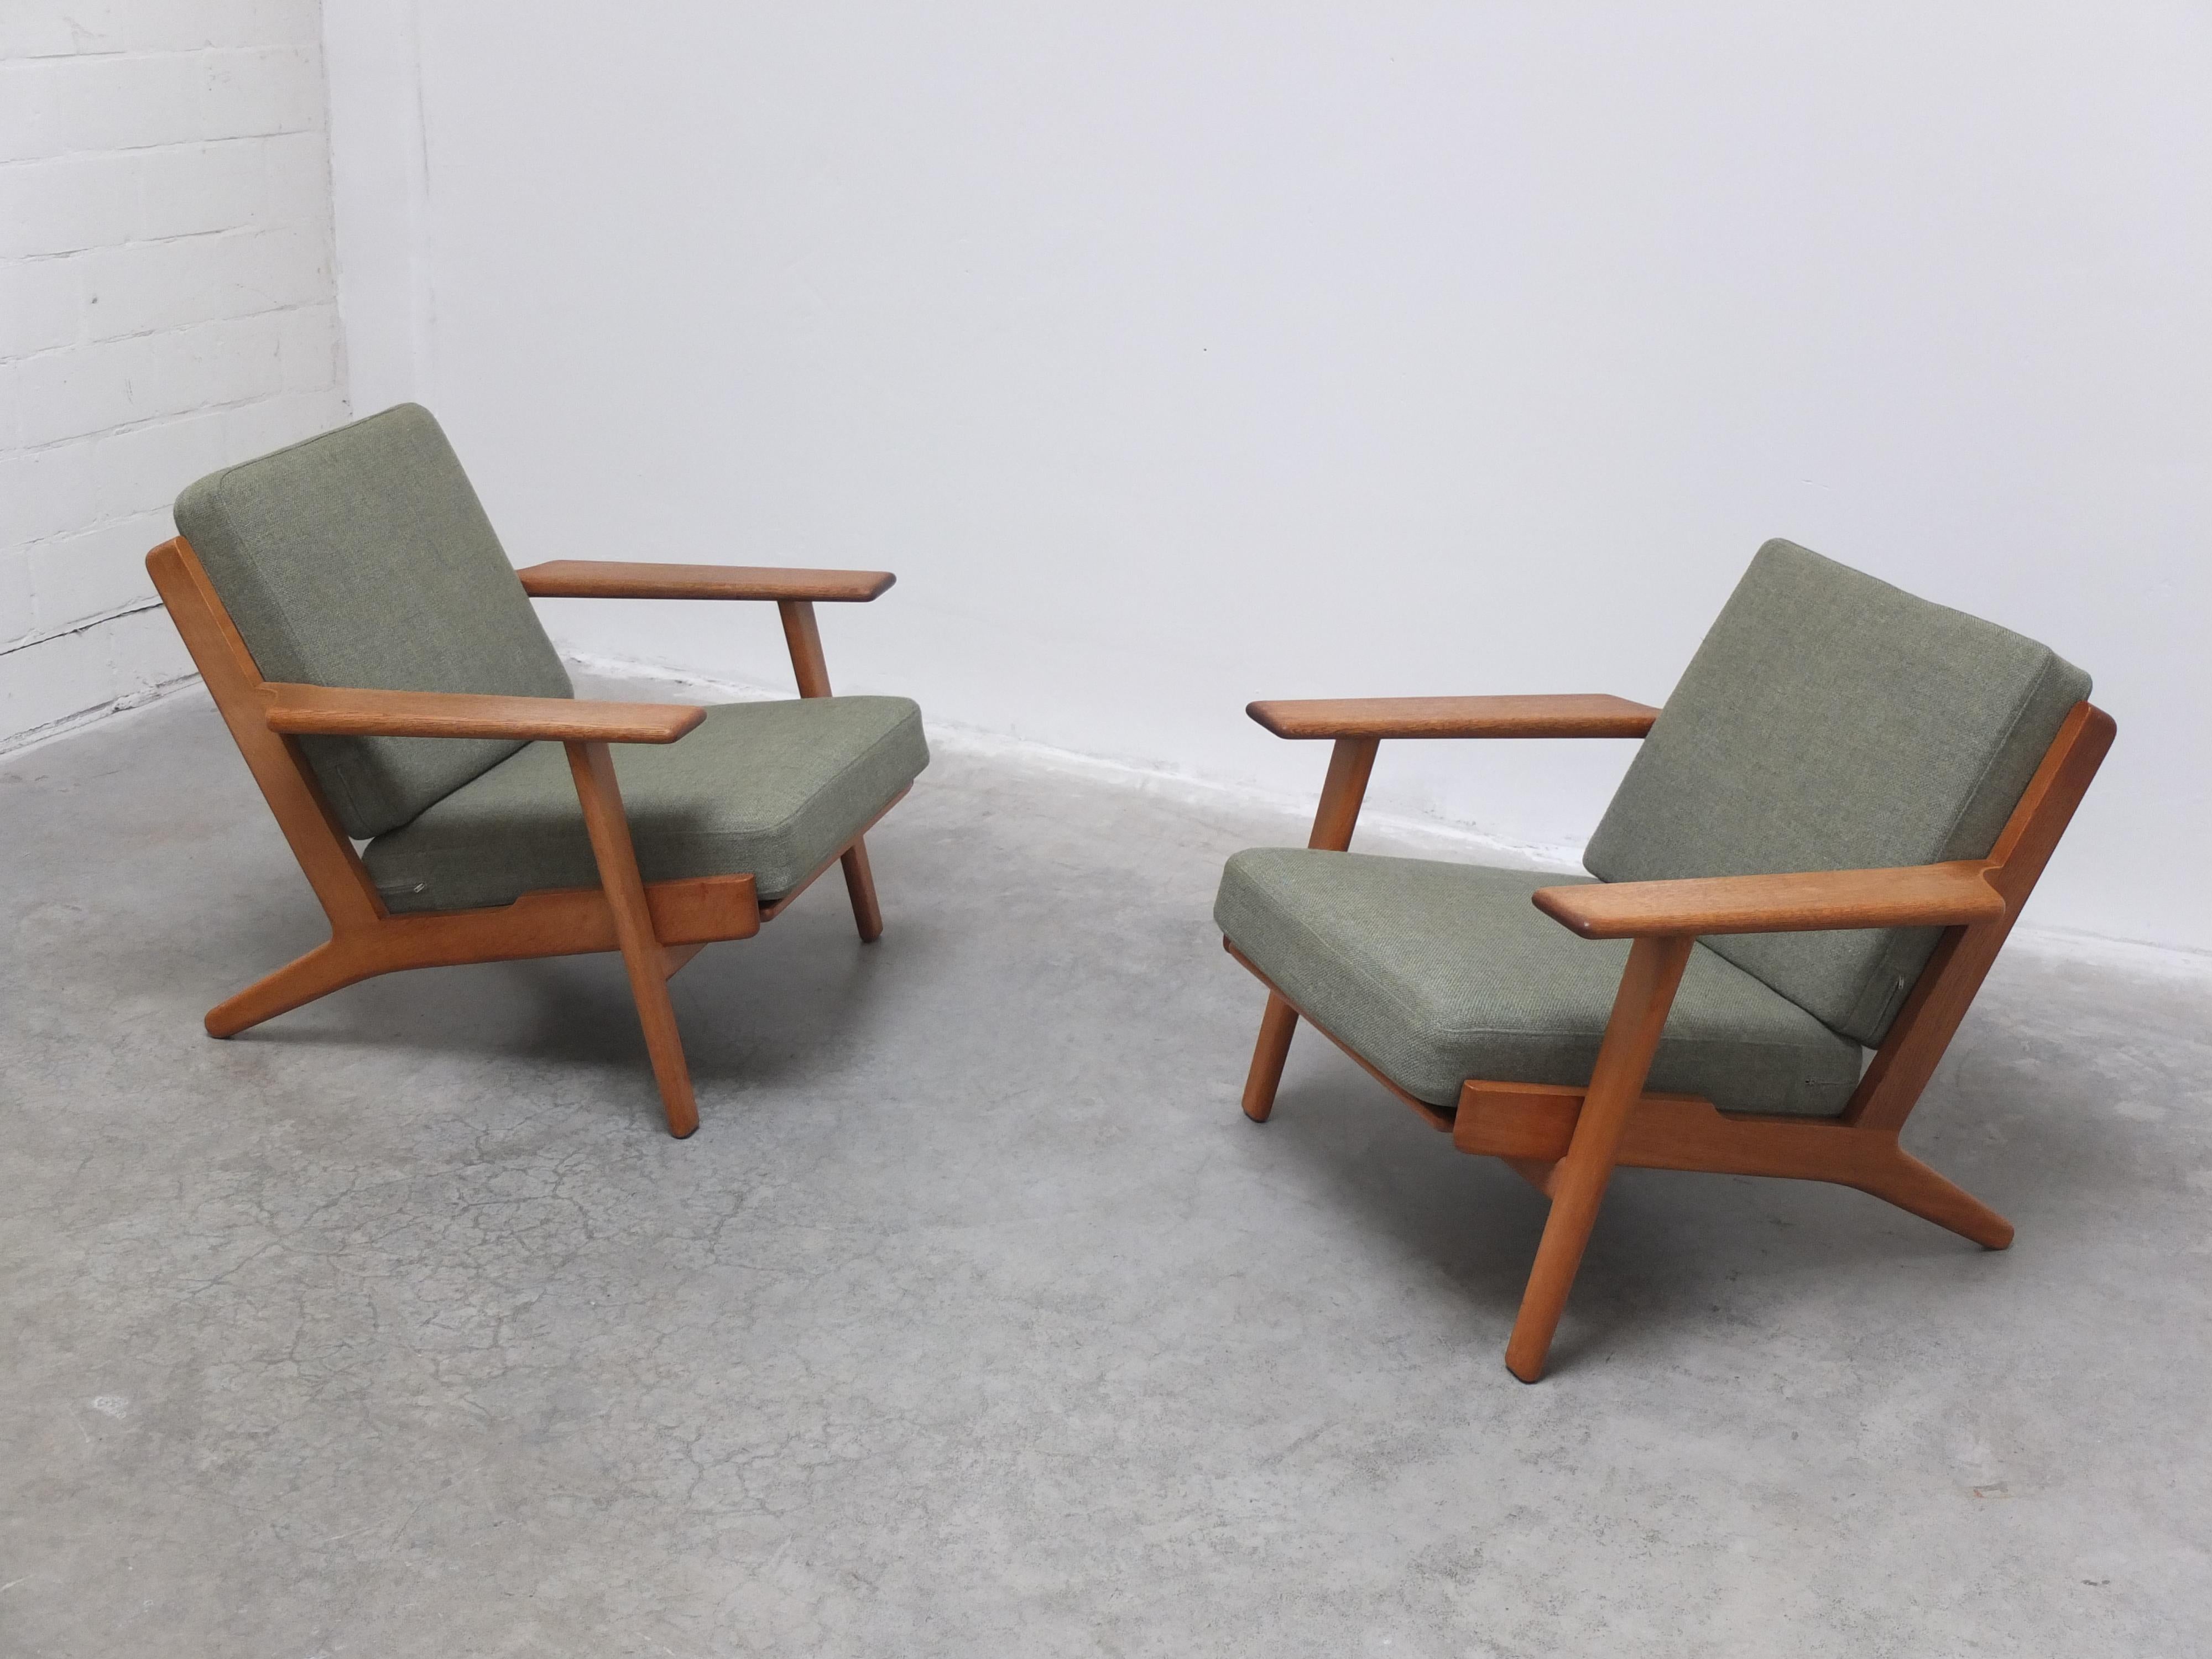 Wool Early Pair of Oak 'GE-290' Lounge Chairs by Hans Wegner for Getama, 1953 For Sale